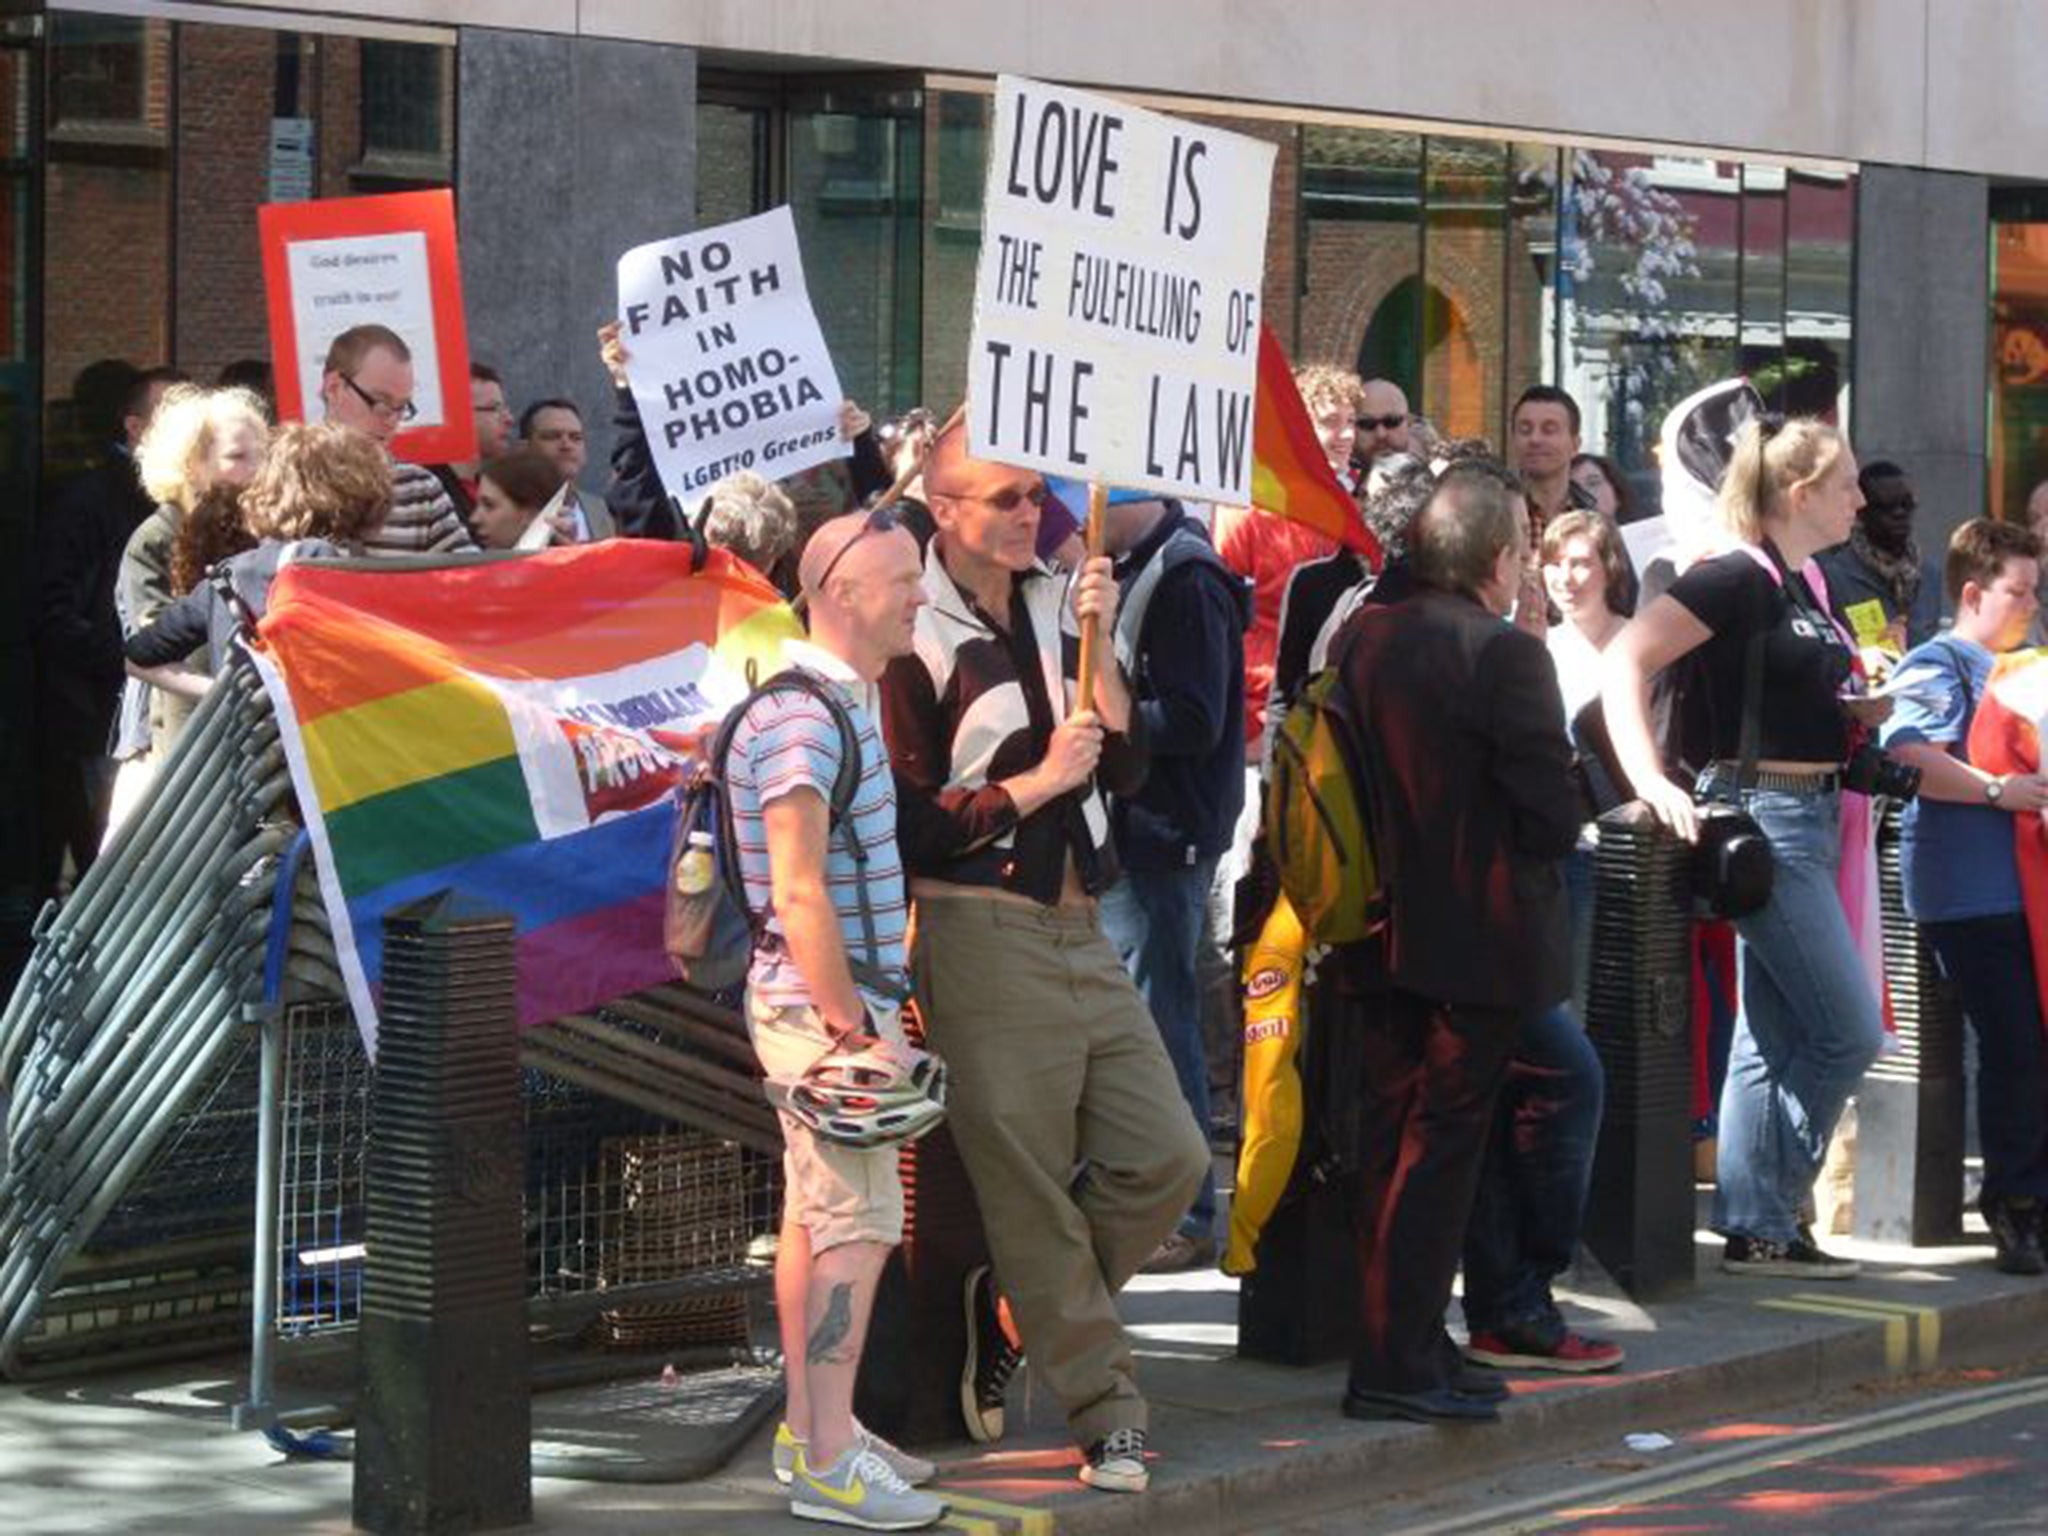 Past conversion therapy conferences have resulted in protests